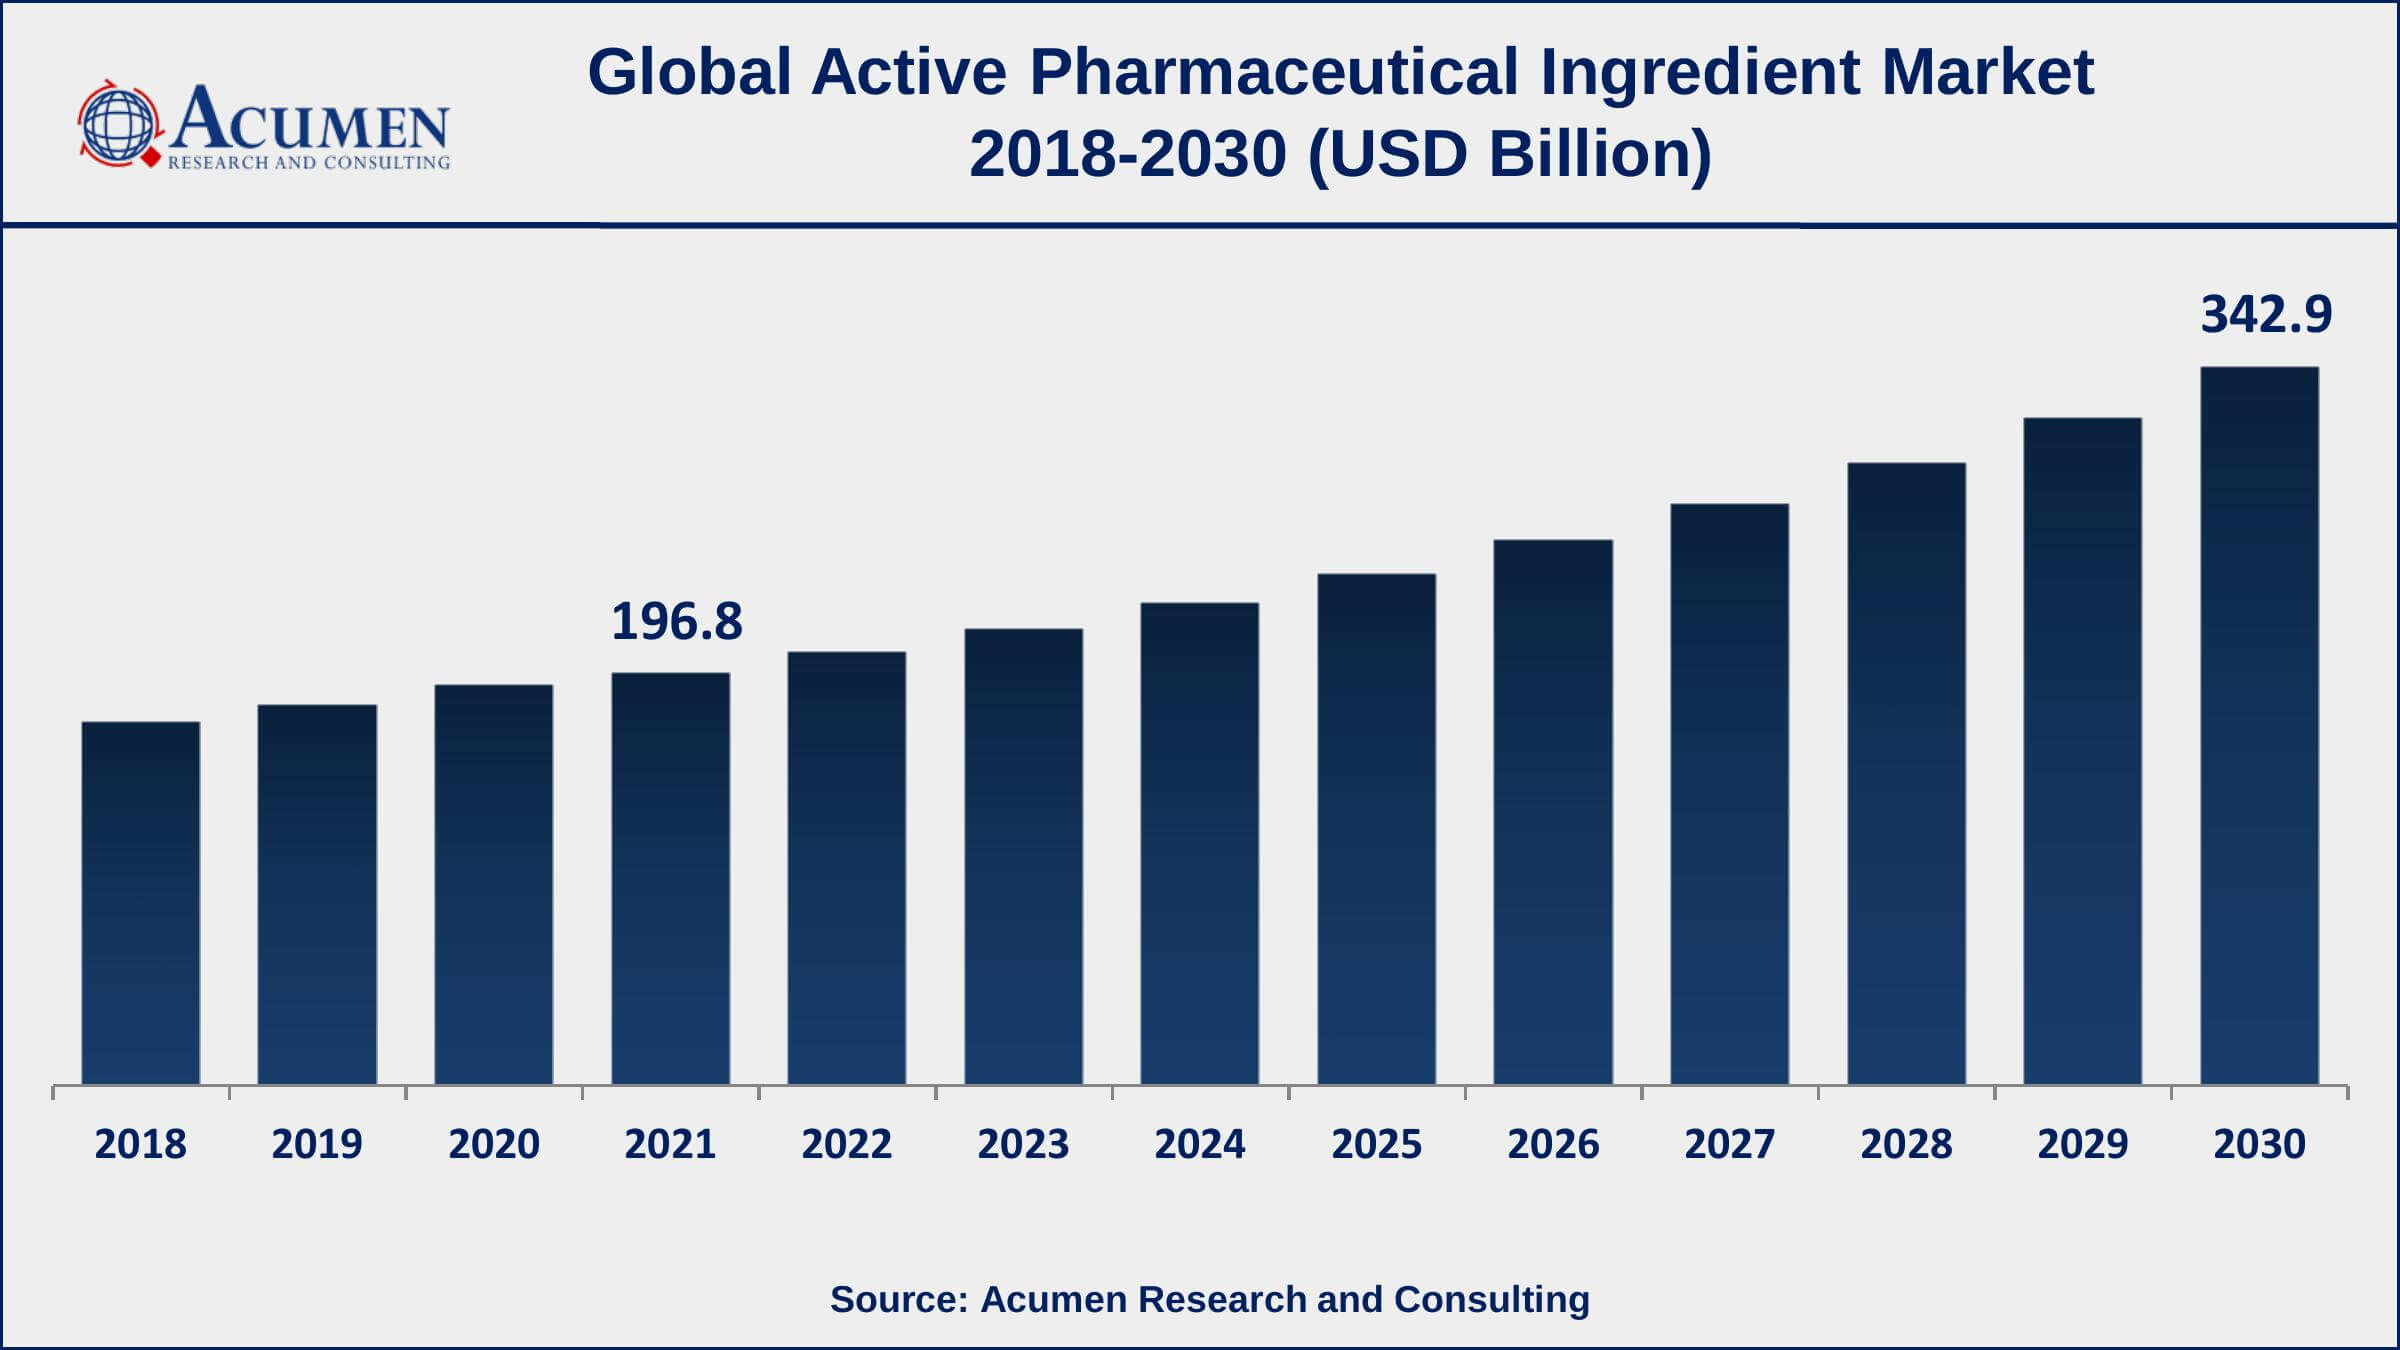 Asia-Pacific active pharmaceutical ingredient market growth will observe strongest CAGR from 2022 to 2030